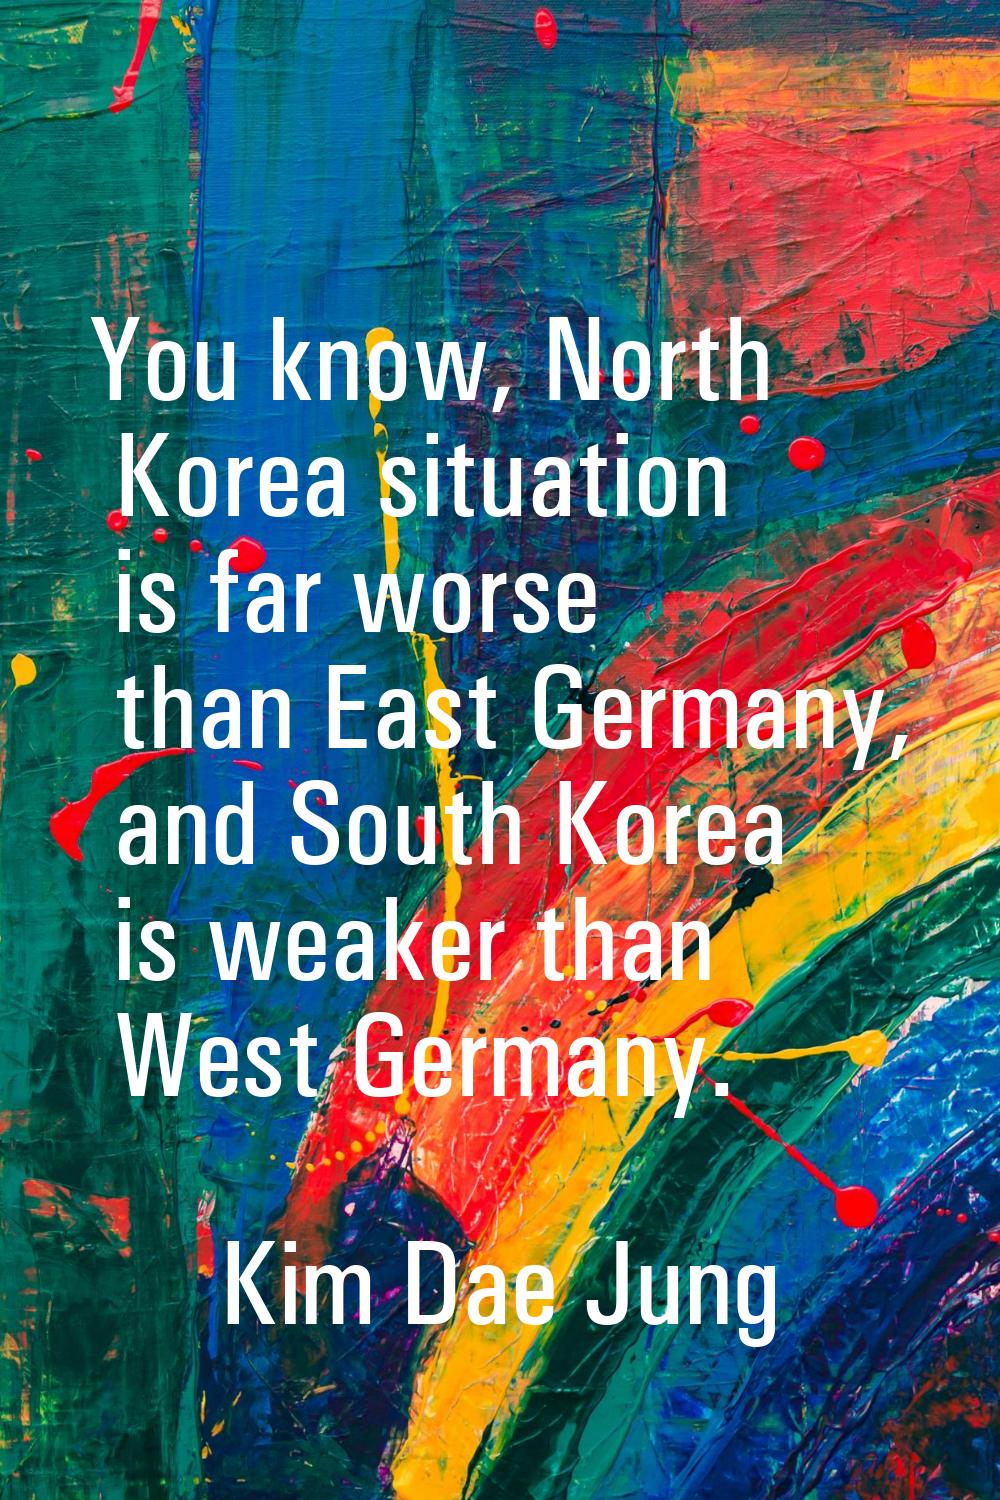 You know, North Korea situation is far worse than East Germany, and South Korea is weaker than West